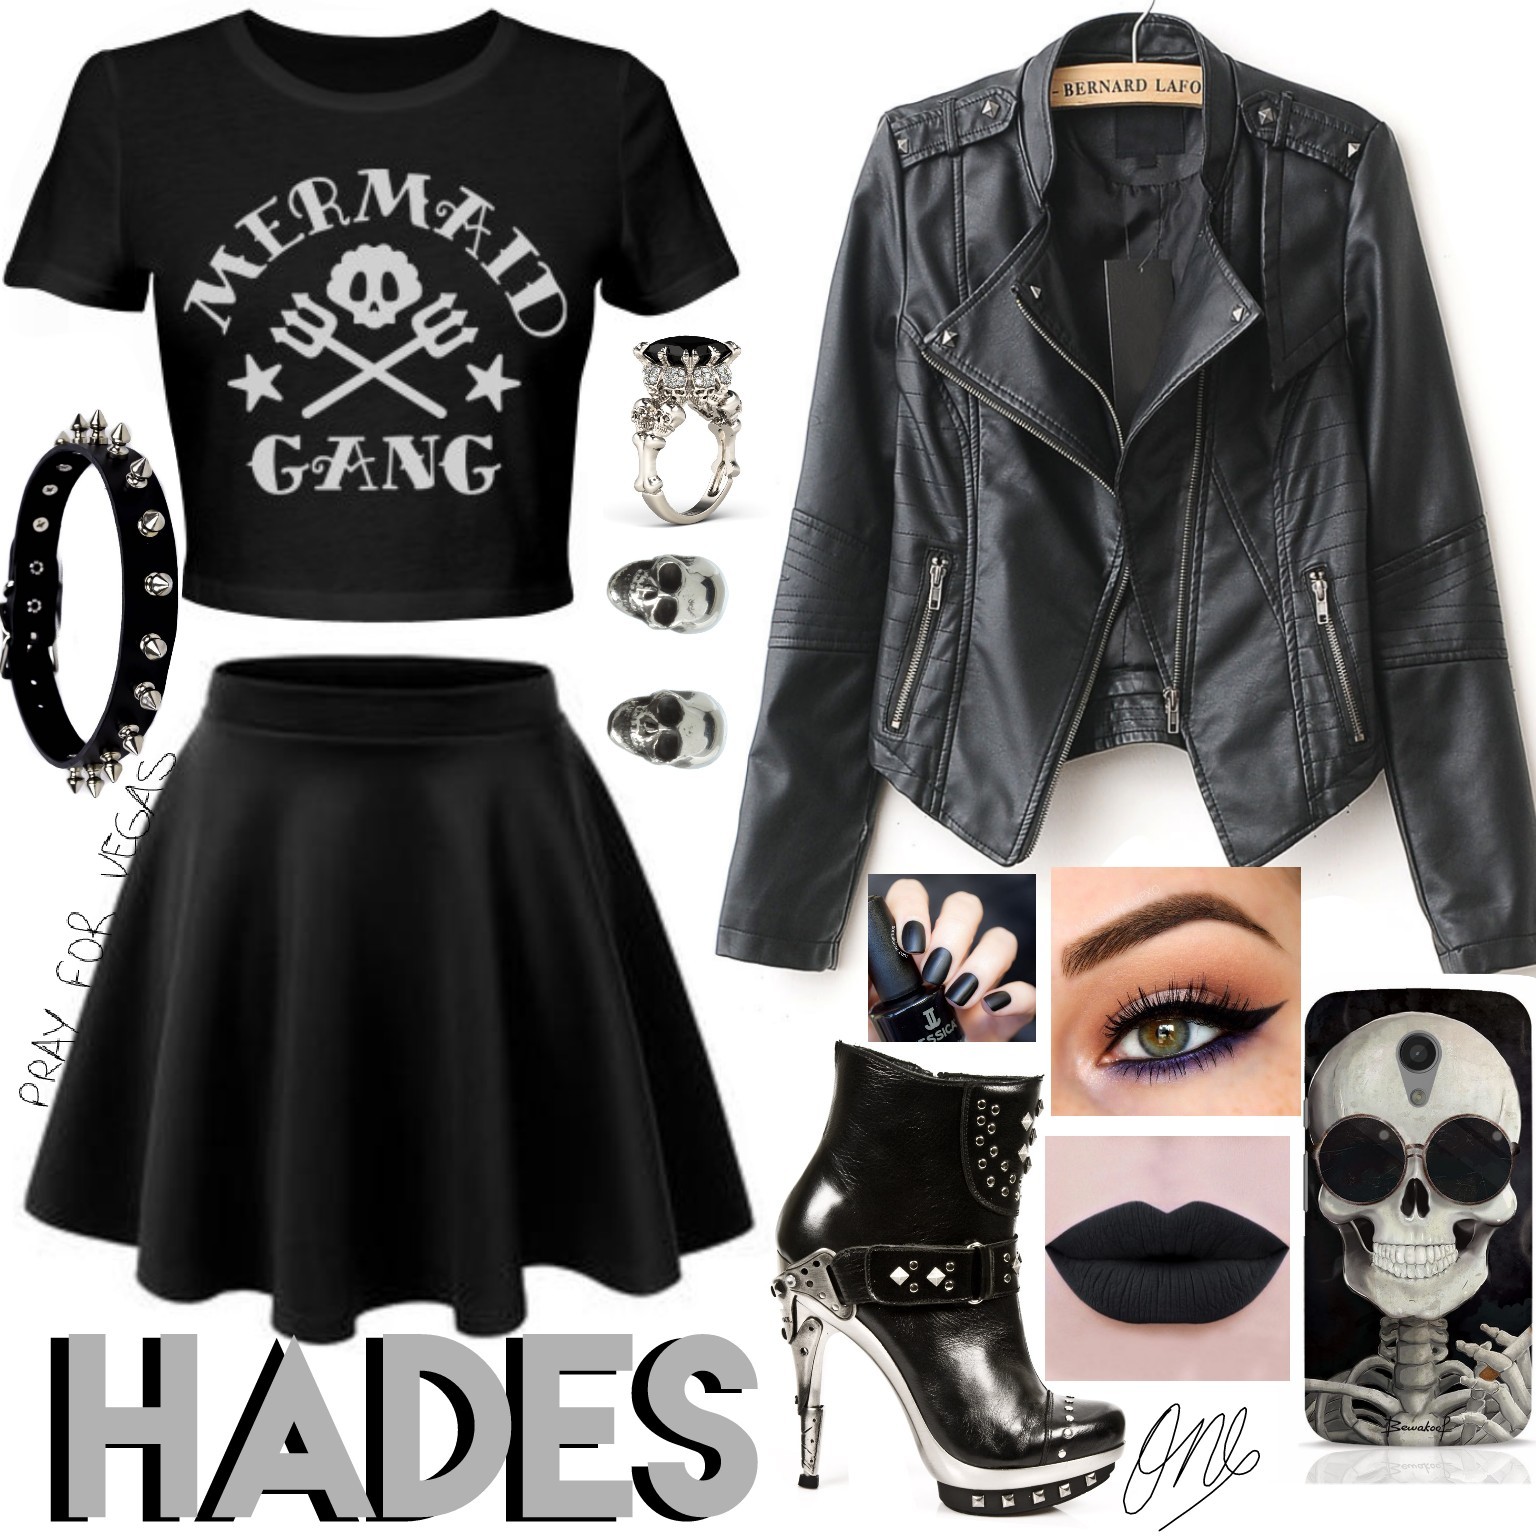 Hades outfit! AGHHH NO TIME FOR A CAPTION! #prayforvegas what happened was so terrible :"( 🙏🙏 bye. gtg for my vocals class! 